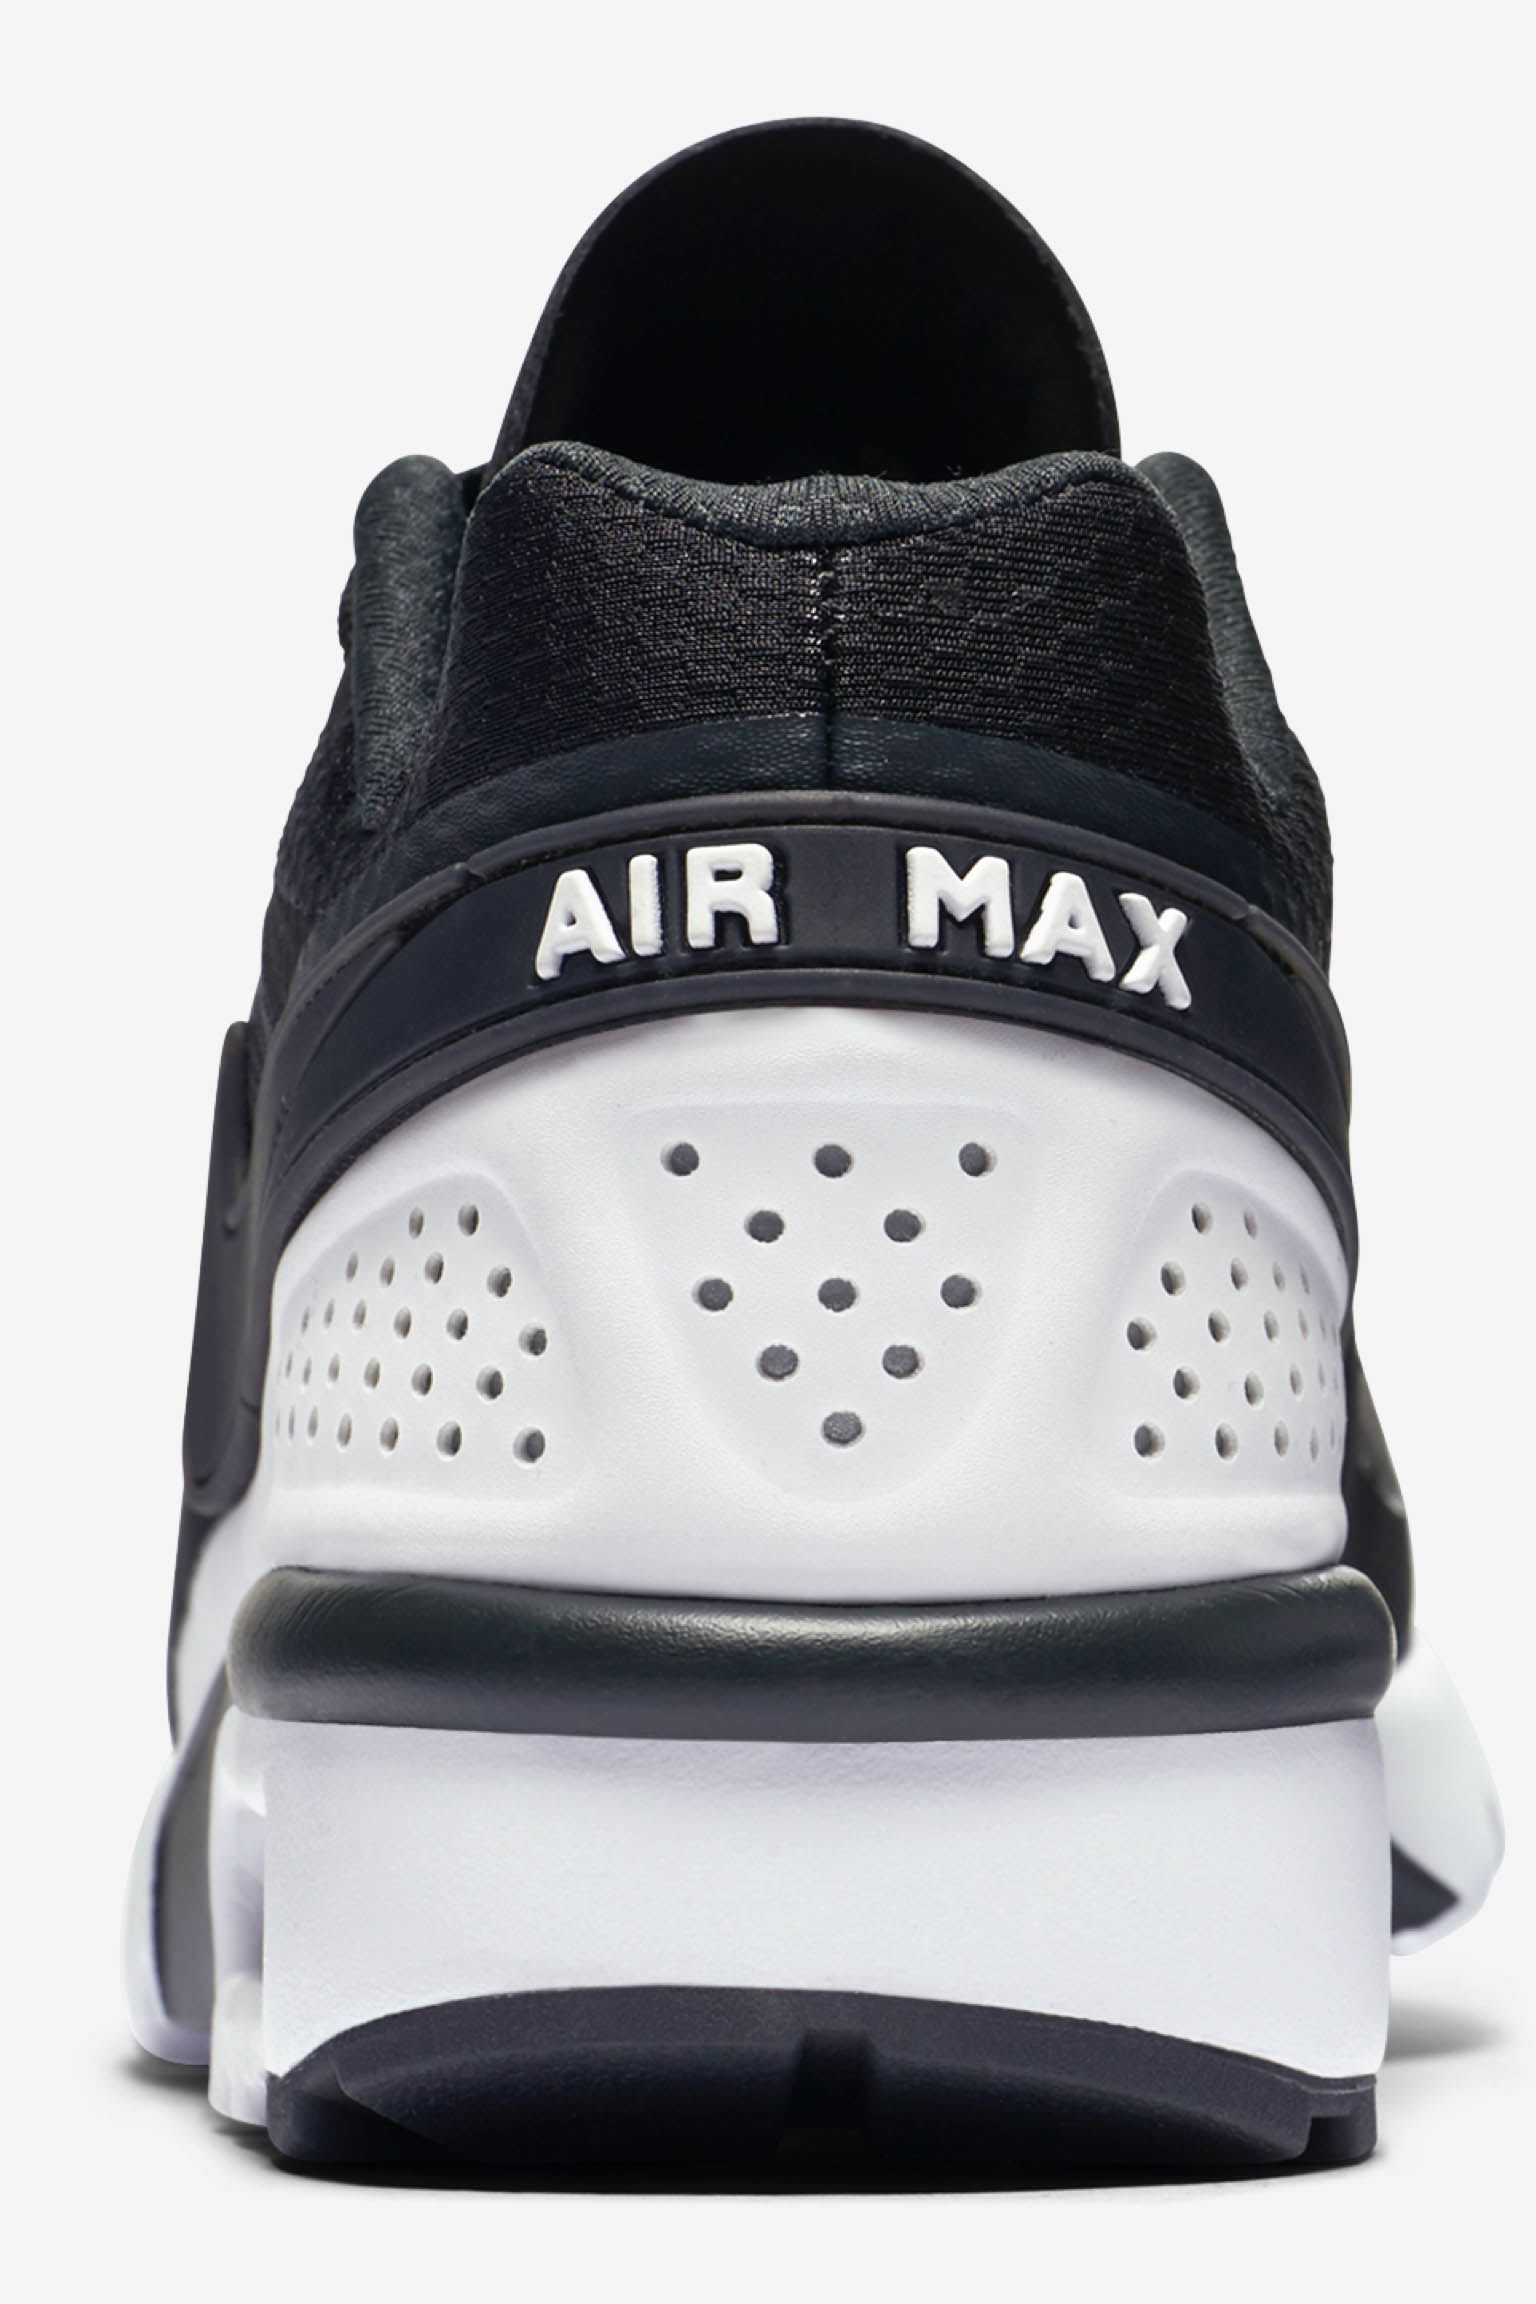 Nike Air Max BW Ultra 'Black & White' Release Date. Nike SNKRS يتساءل